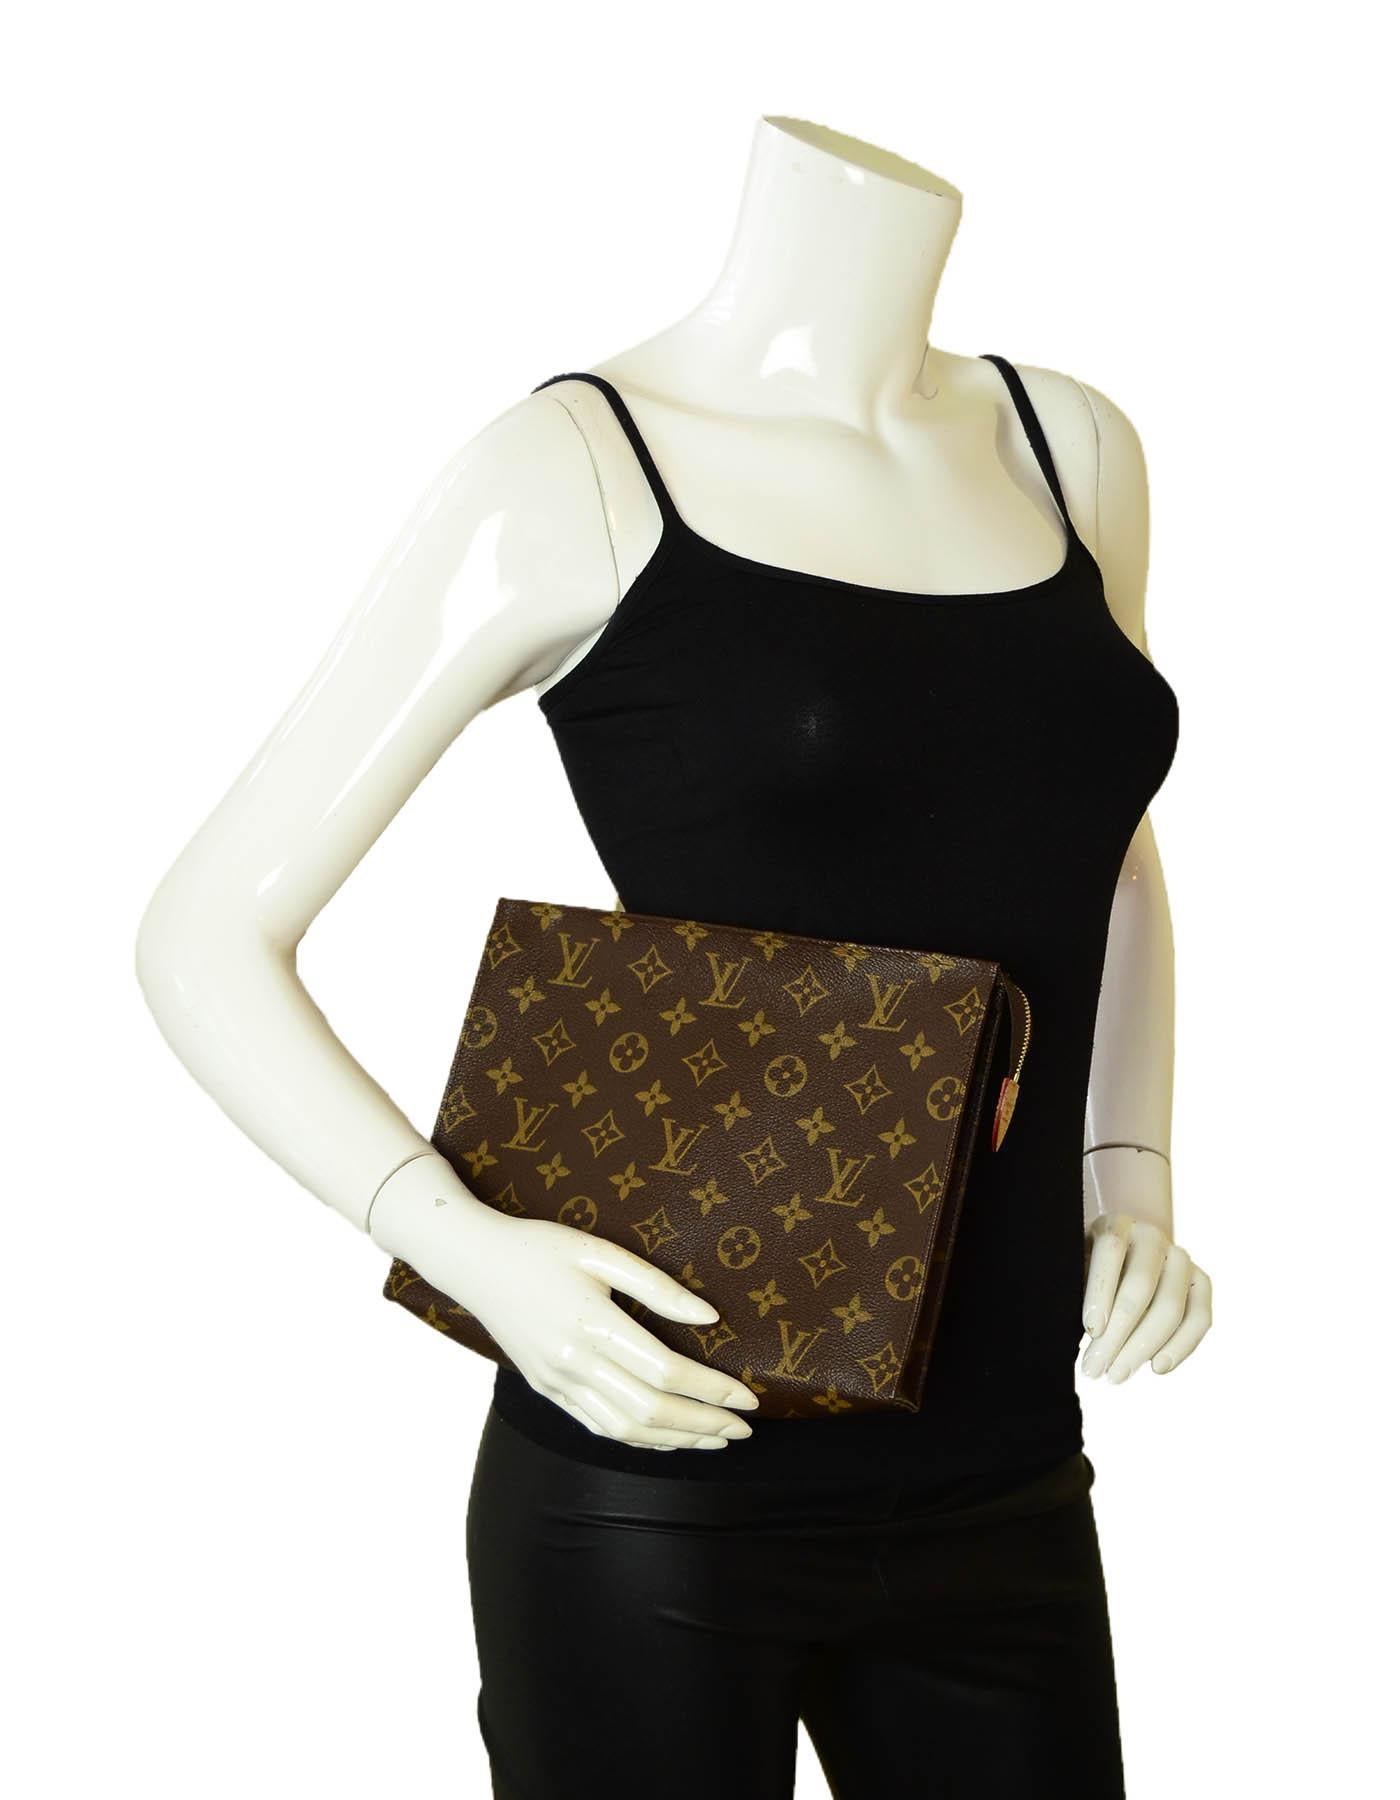 Louis Vuitton SOLD OUT Monogram Coated Canvas Toiletry 26 Pouch/Clutch Bag

Made In: France
Year of Production: 2015
Color: Brown
Hardware: Goldtone brass
Materials: Monogram coated canvas with vachetta leather
Lining: Beige washable